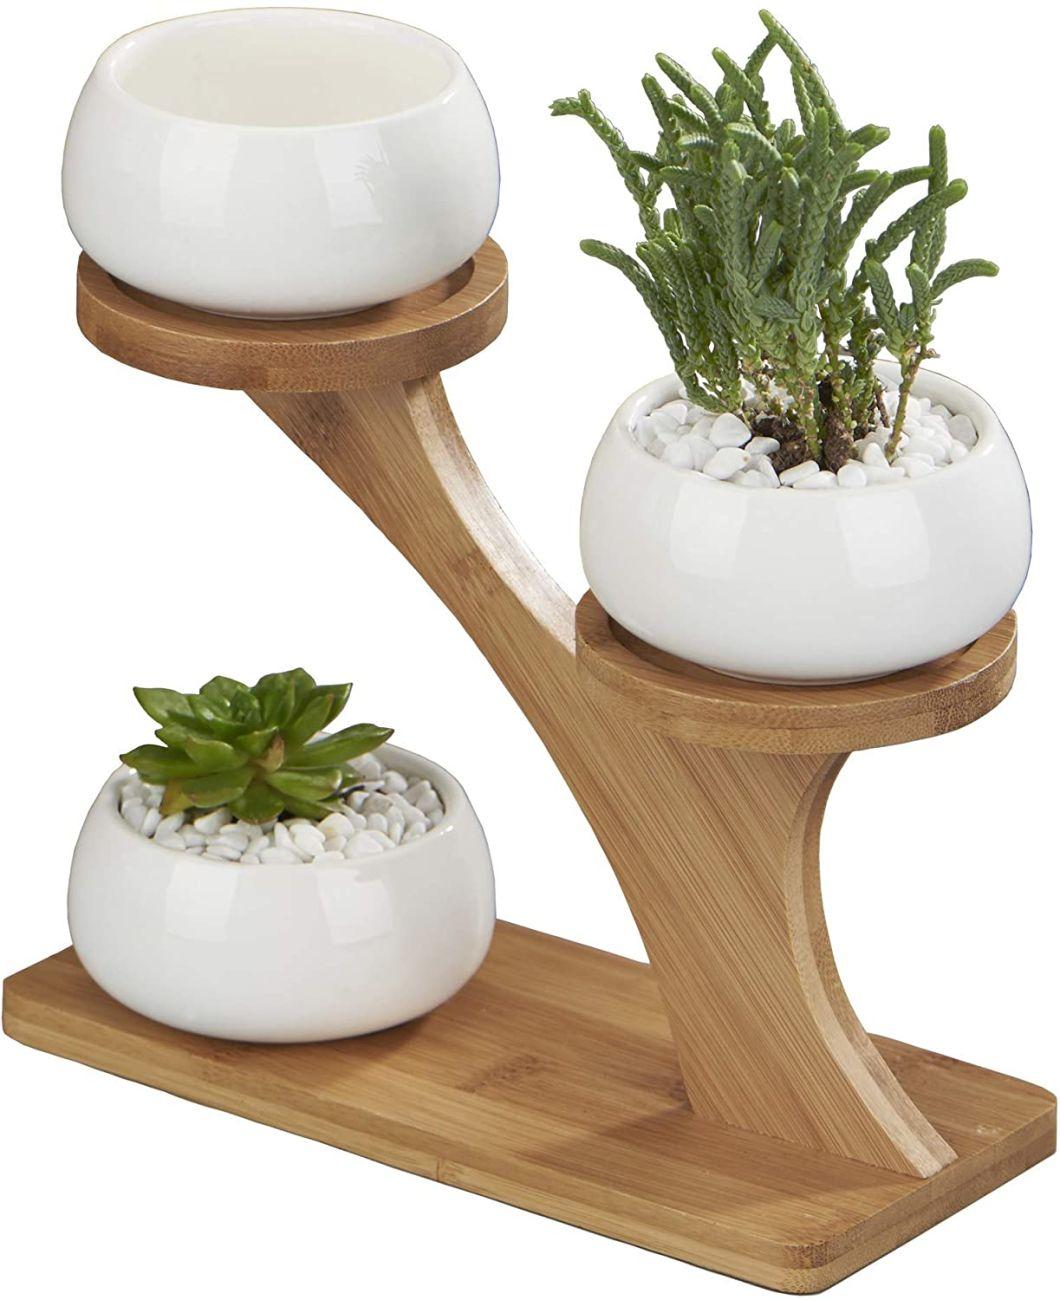 Planter Pots Indoor, 3 Pack 3 Inch White Ceramic Decorative Small Round Succulent Cactus Flower Plant Pot with Tree Tier Bamboo Stand for Garden Kitchen Home of